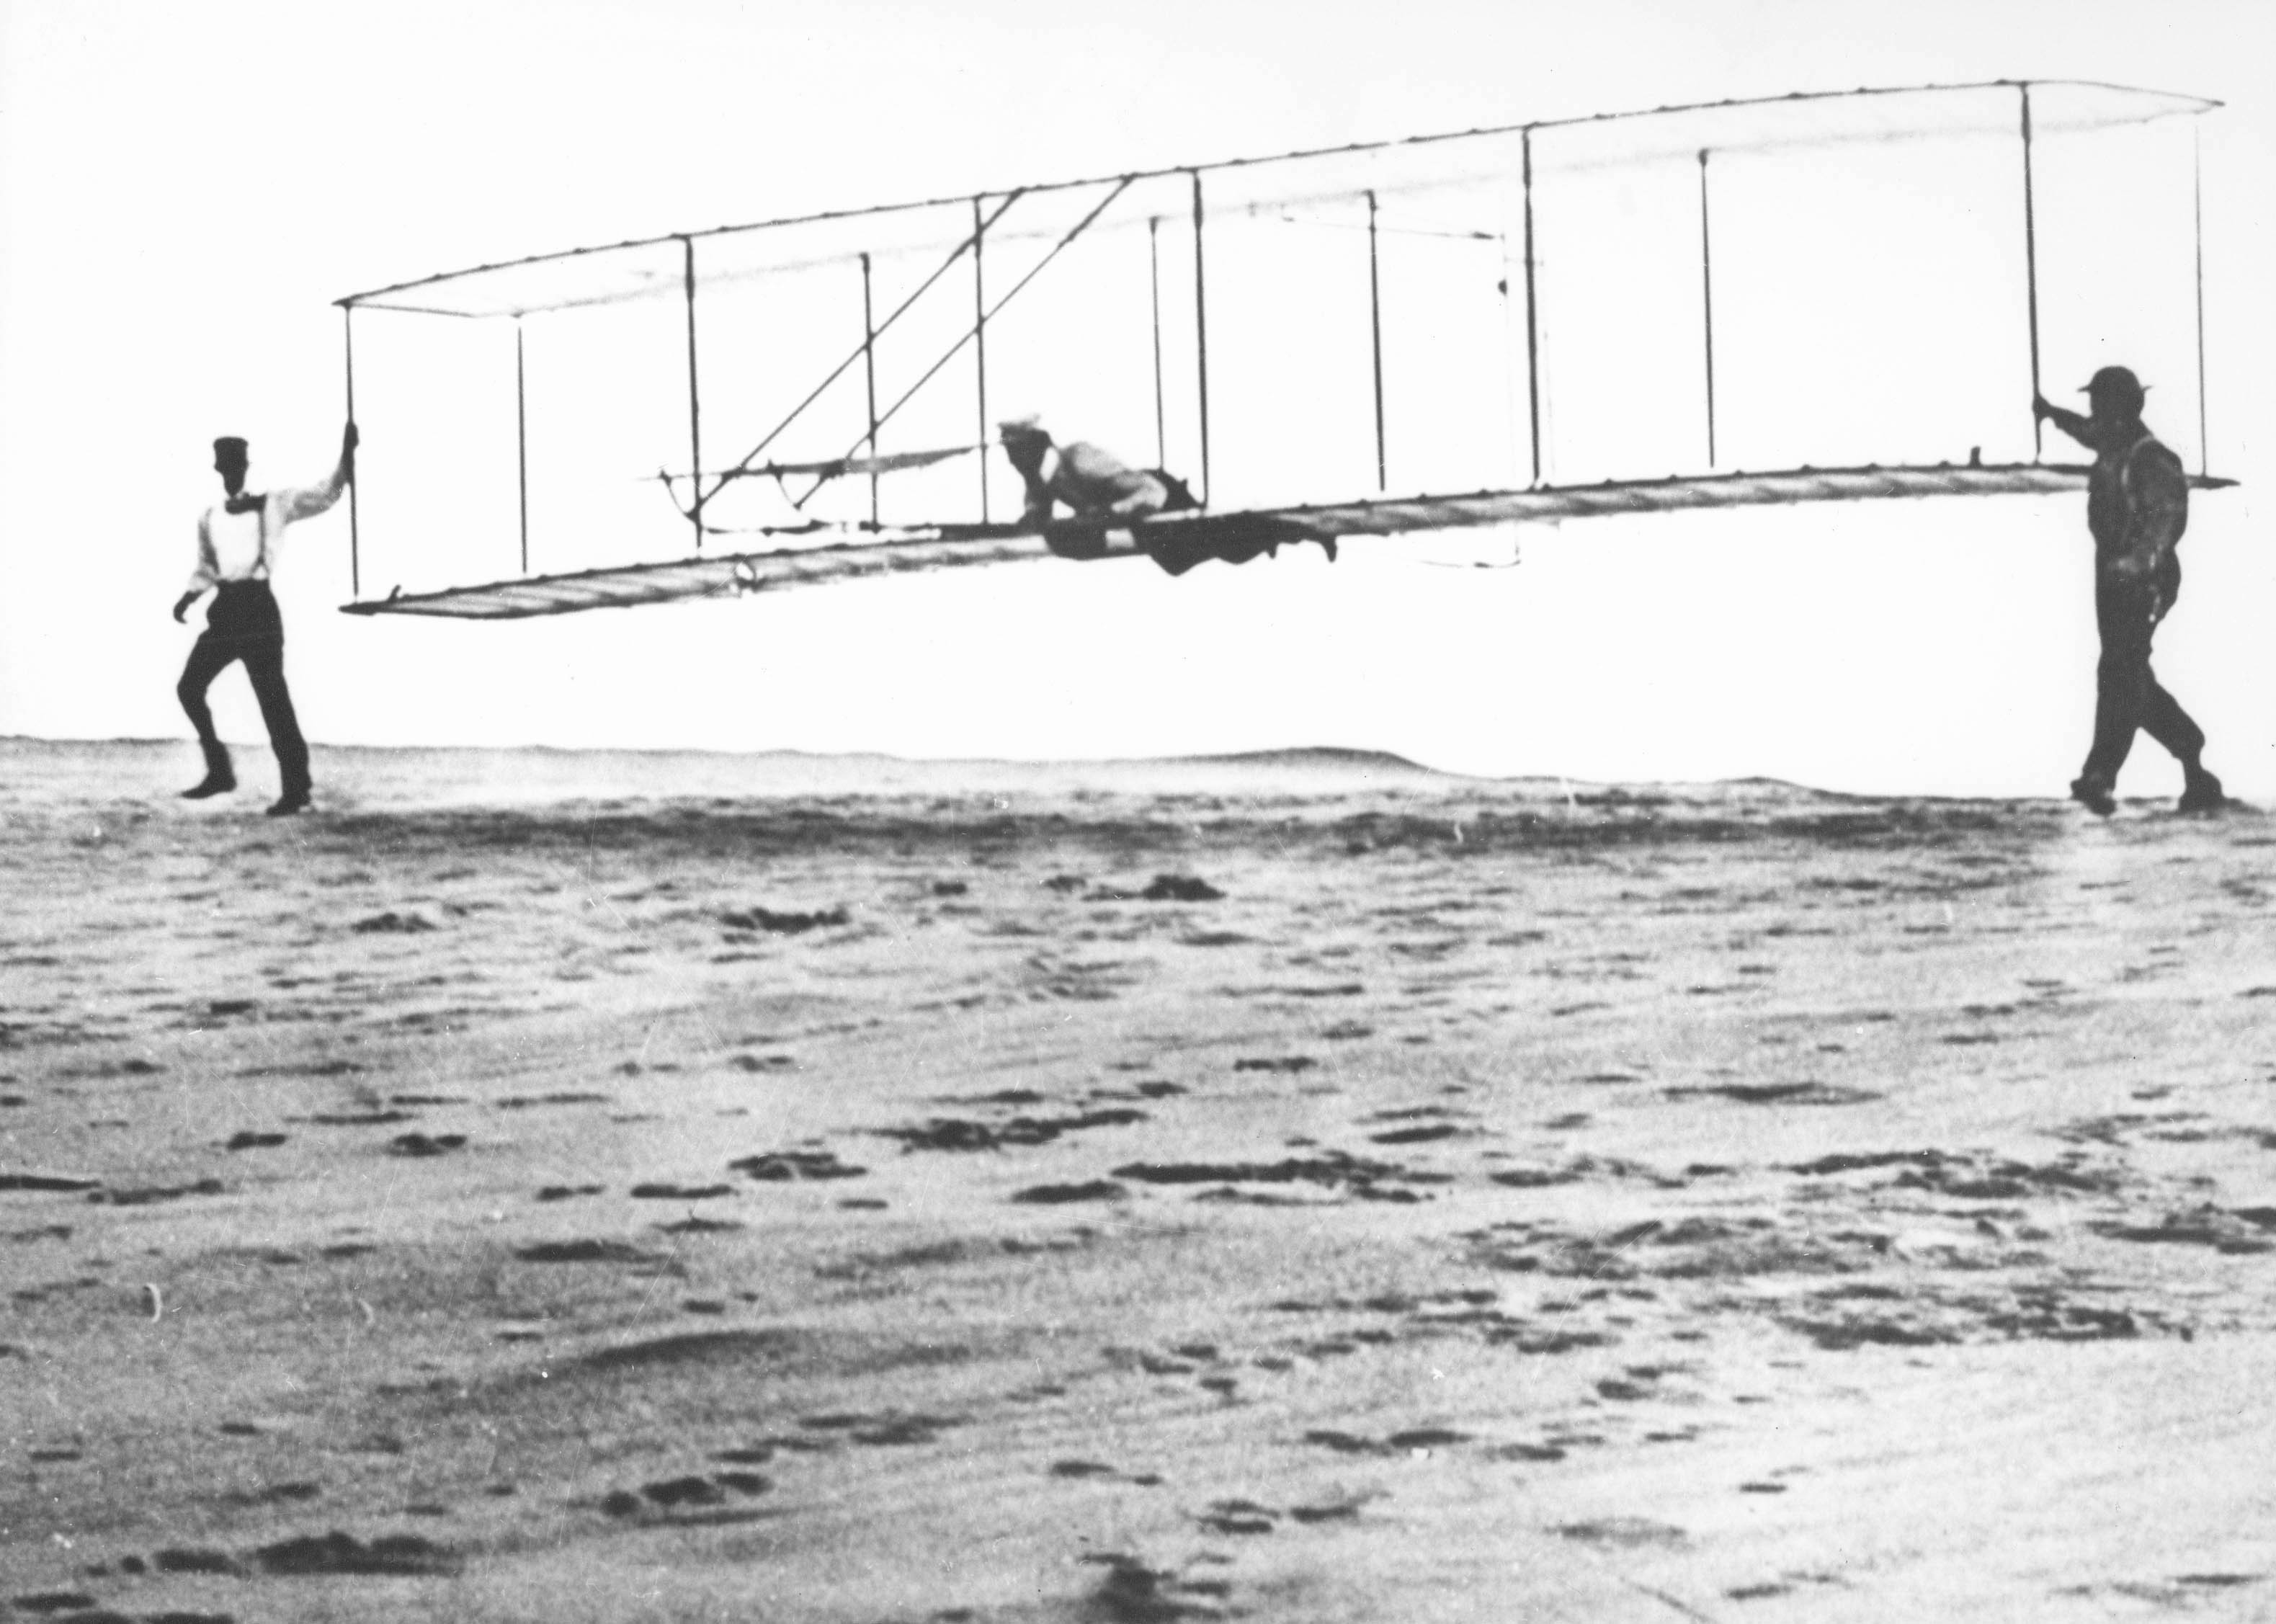 Historic photo of the Wright brothers’ third test glider being launched at Kill Devil Hills, North Carolina, on October 10, 1902. Wilbur Wright is at the controls, Orville Wright is at left, and Dan Tate (a local resident and friend of the Wright brothers) is at right.